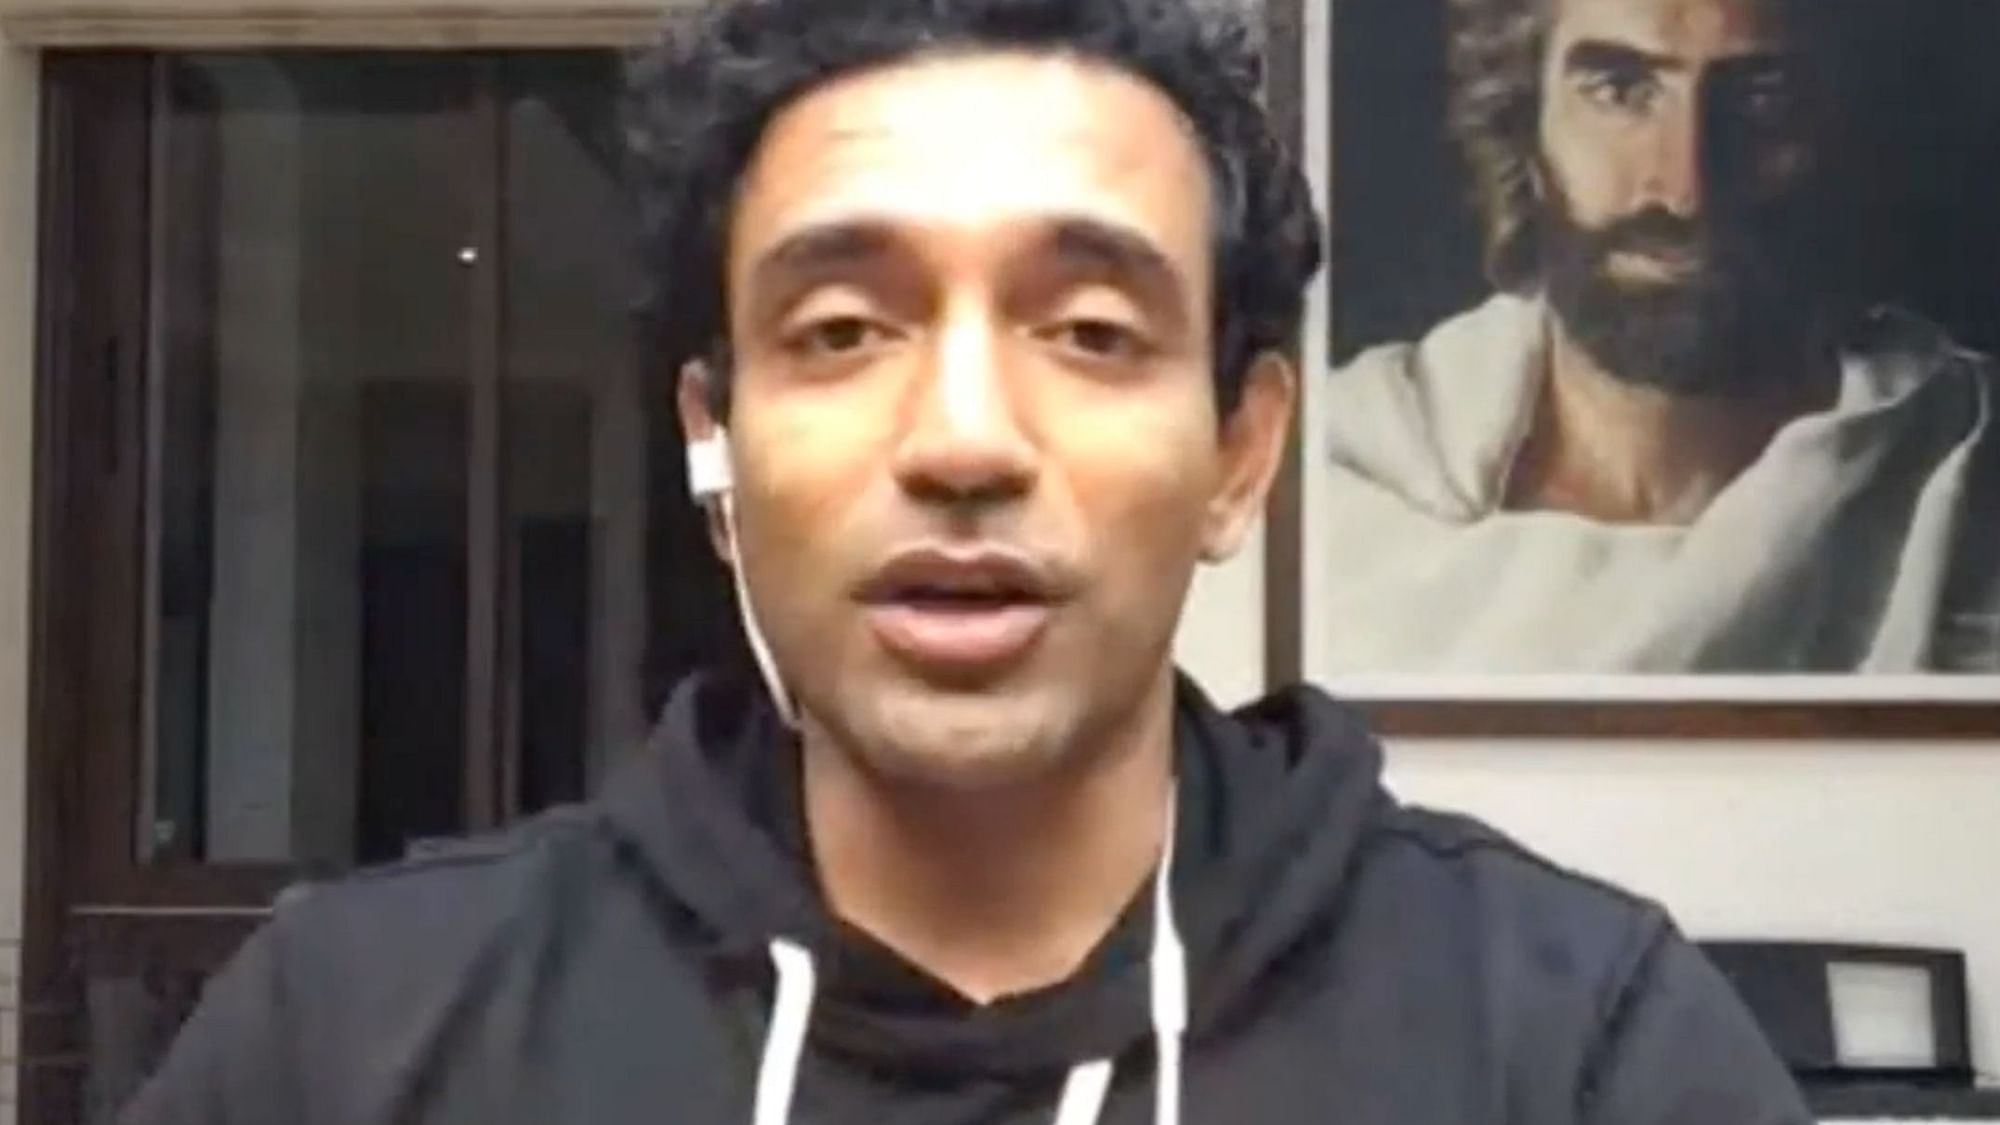 Robin Uthappa revealed that he suffered from depression and had suicidal thoughts on a daily basis between 2009 and 2011.